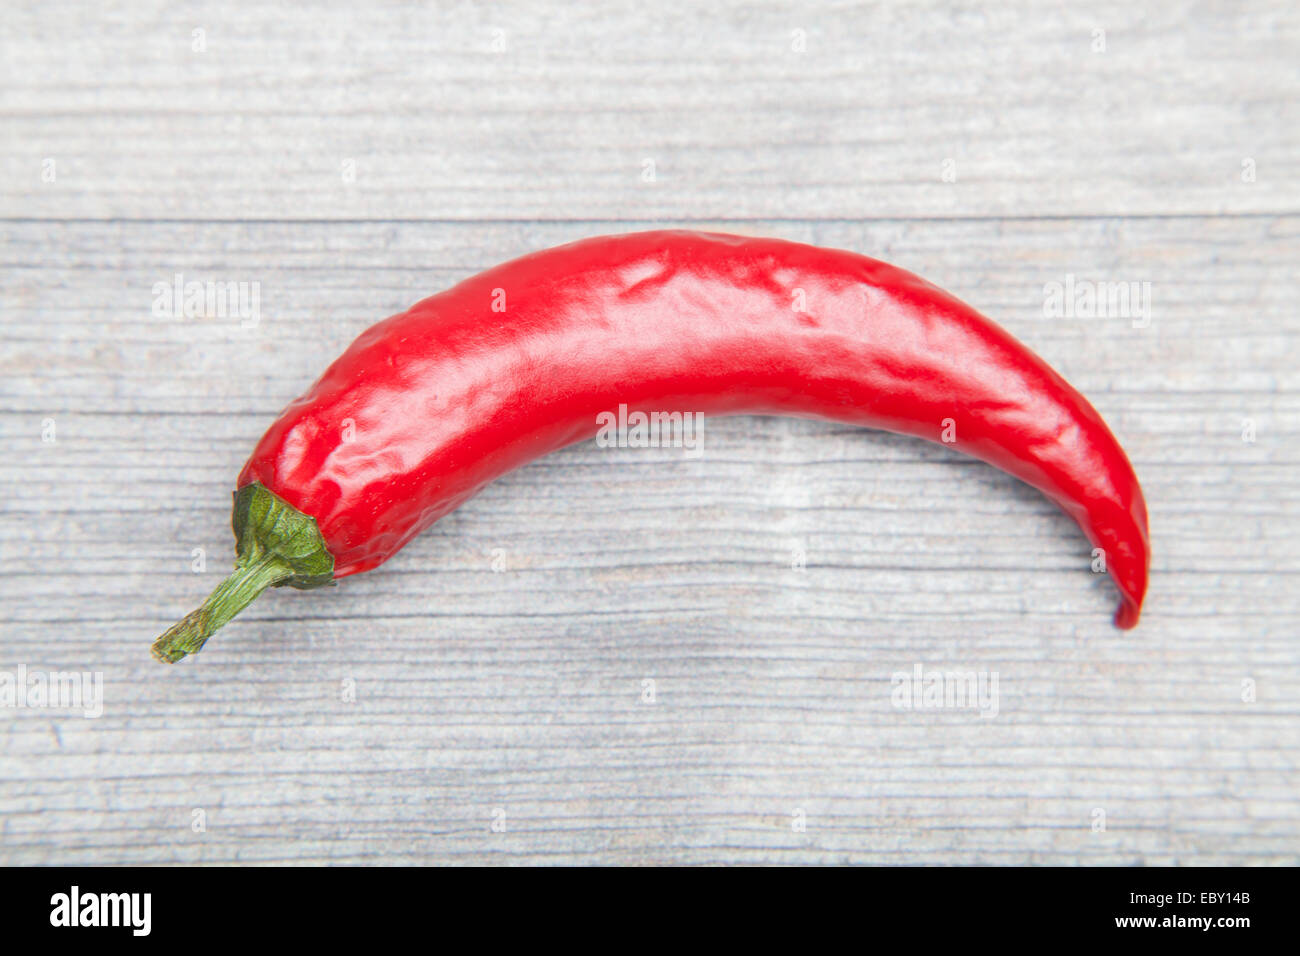 red pepper on wooden table Stock Photo